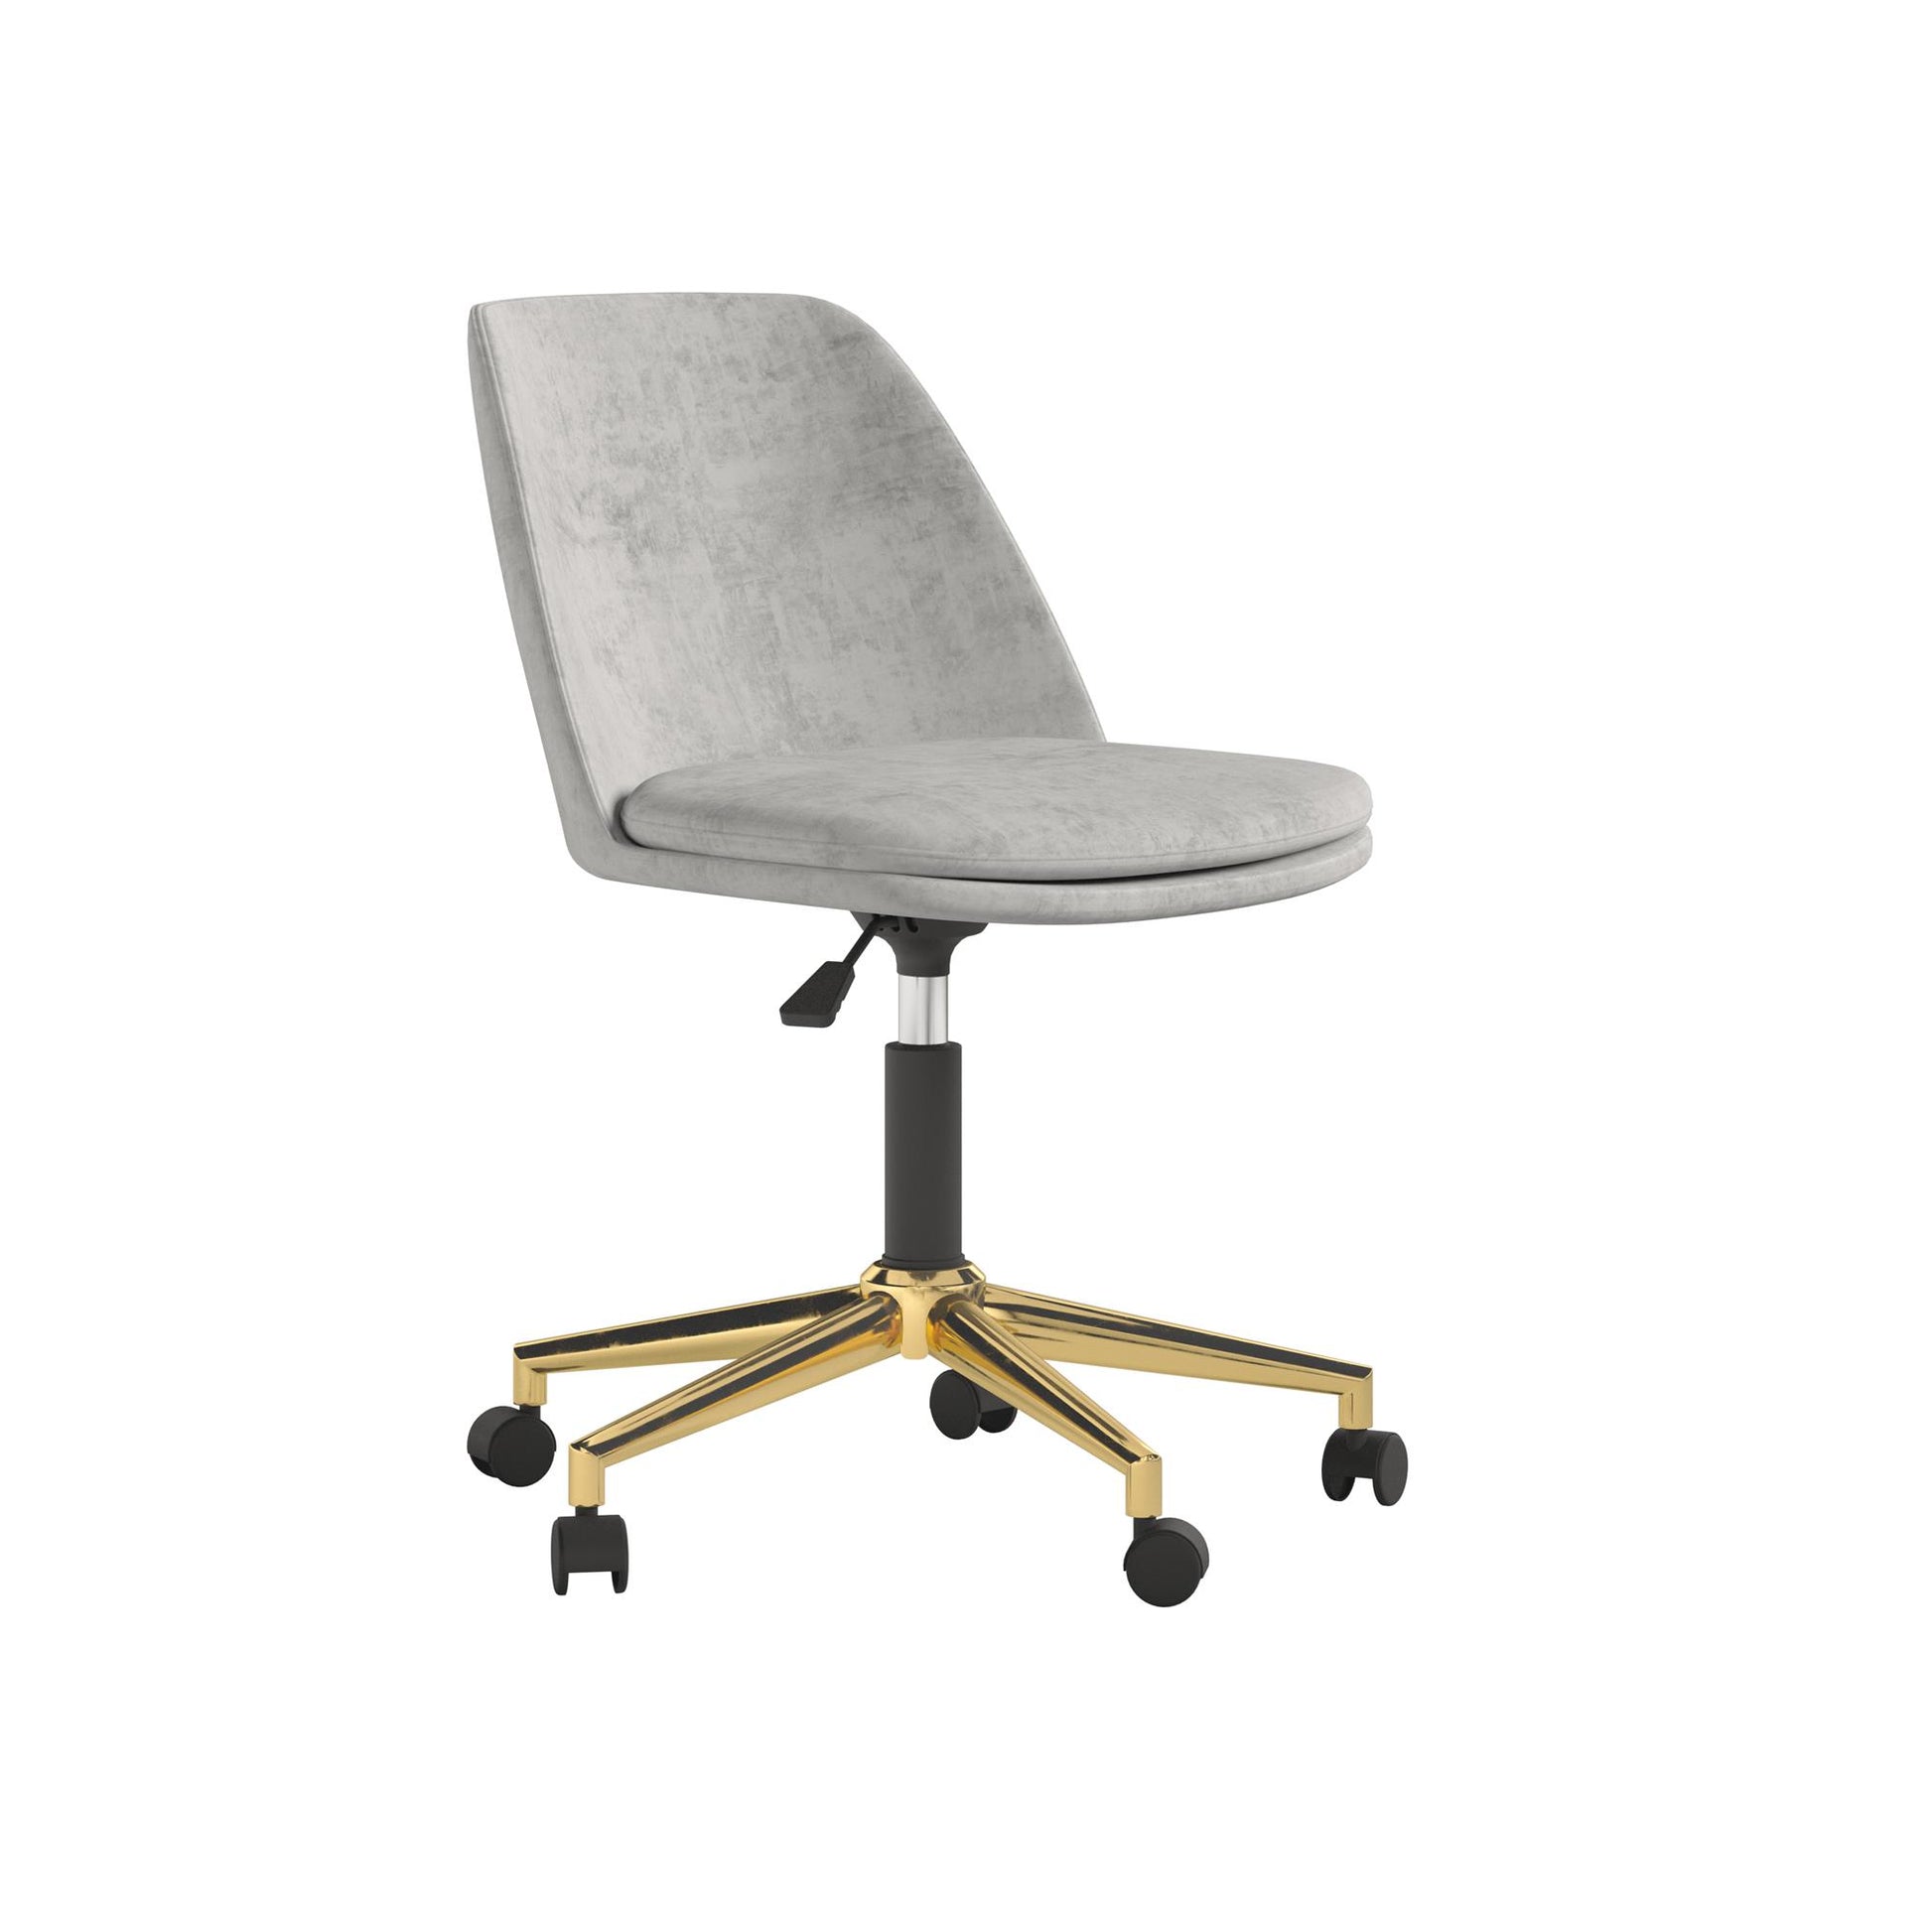 Ivy Pillowtop Office Task Chair with Adjustable Seat Height - Light Gray